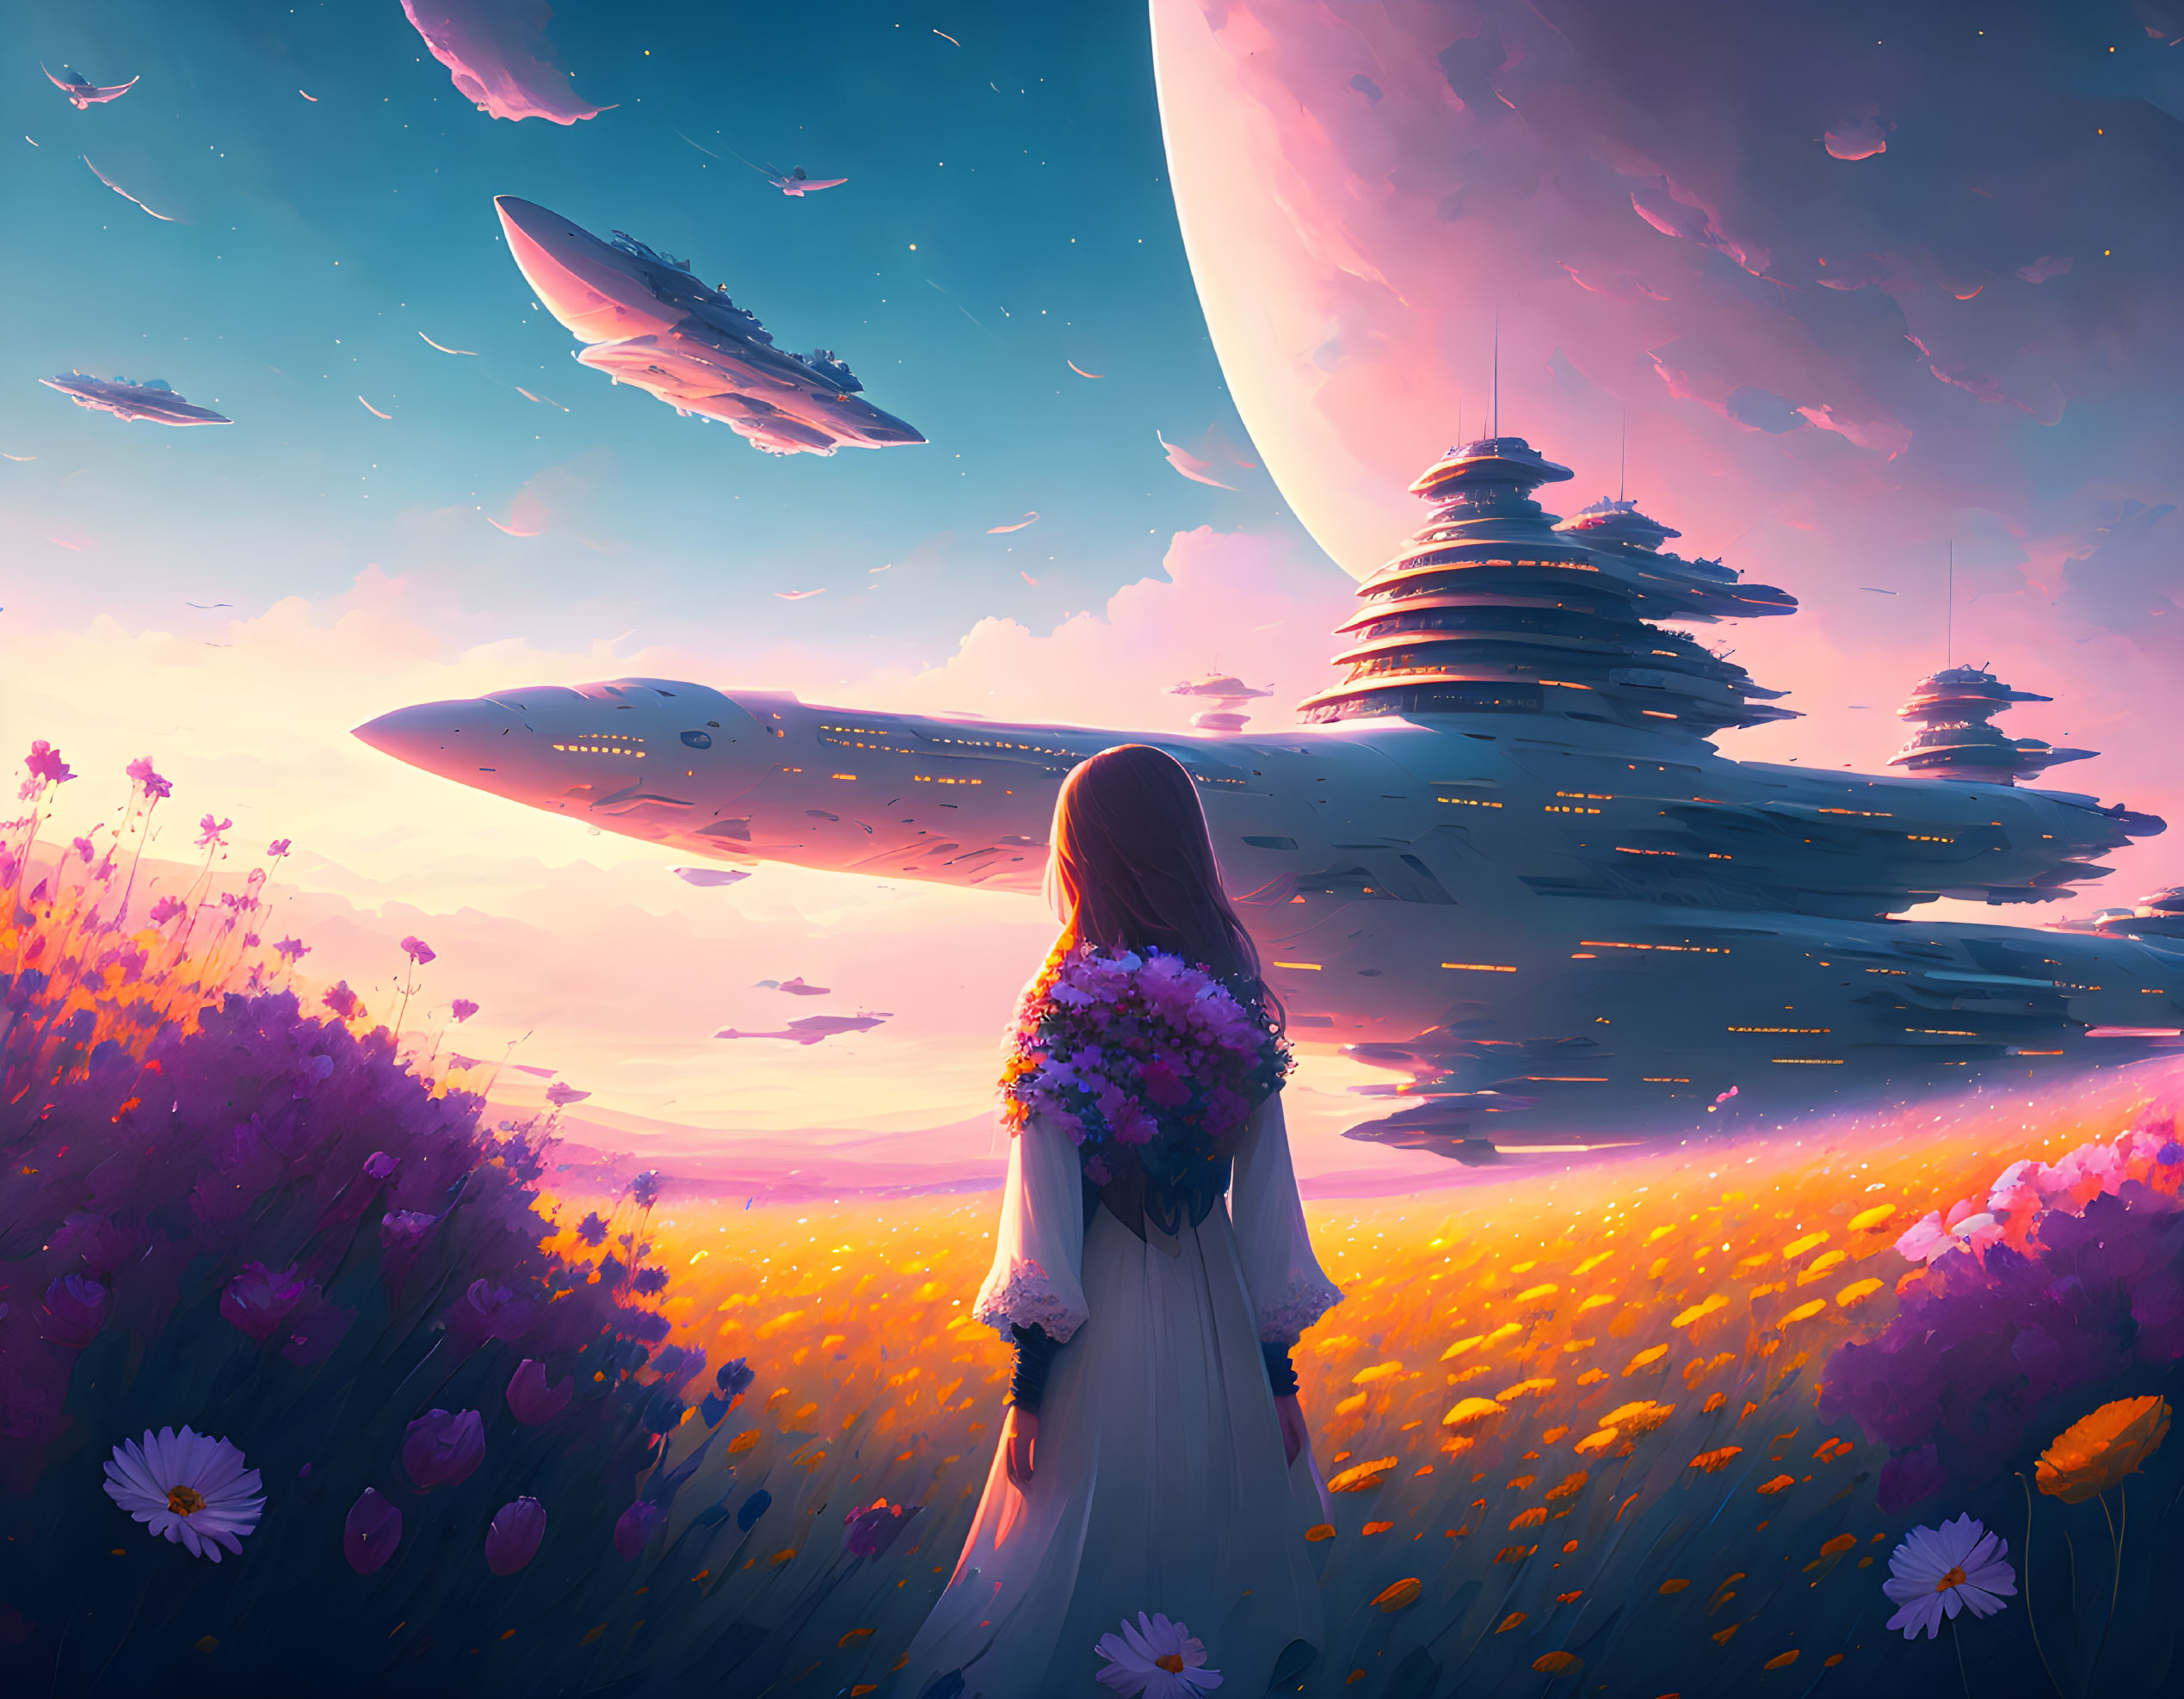 Woman with bouquet in vibrant field gazes at ships in sky above planet and sunset